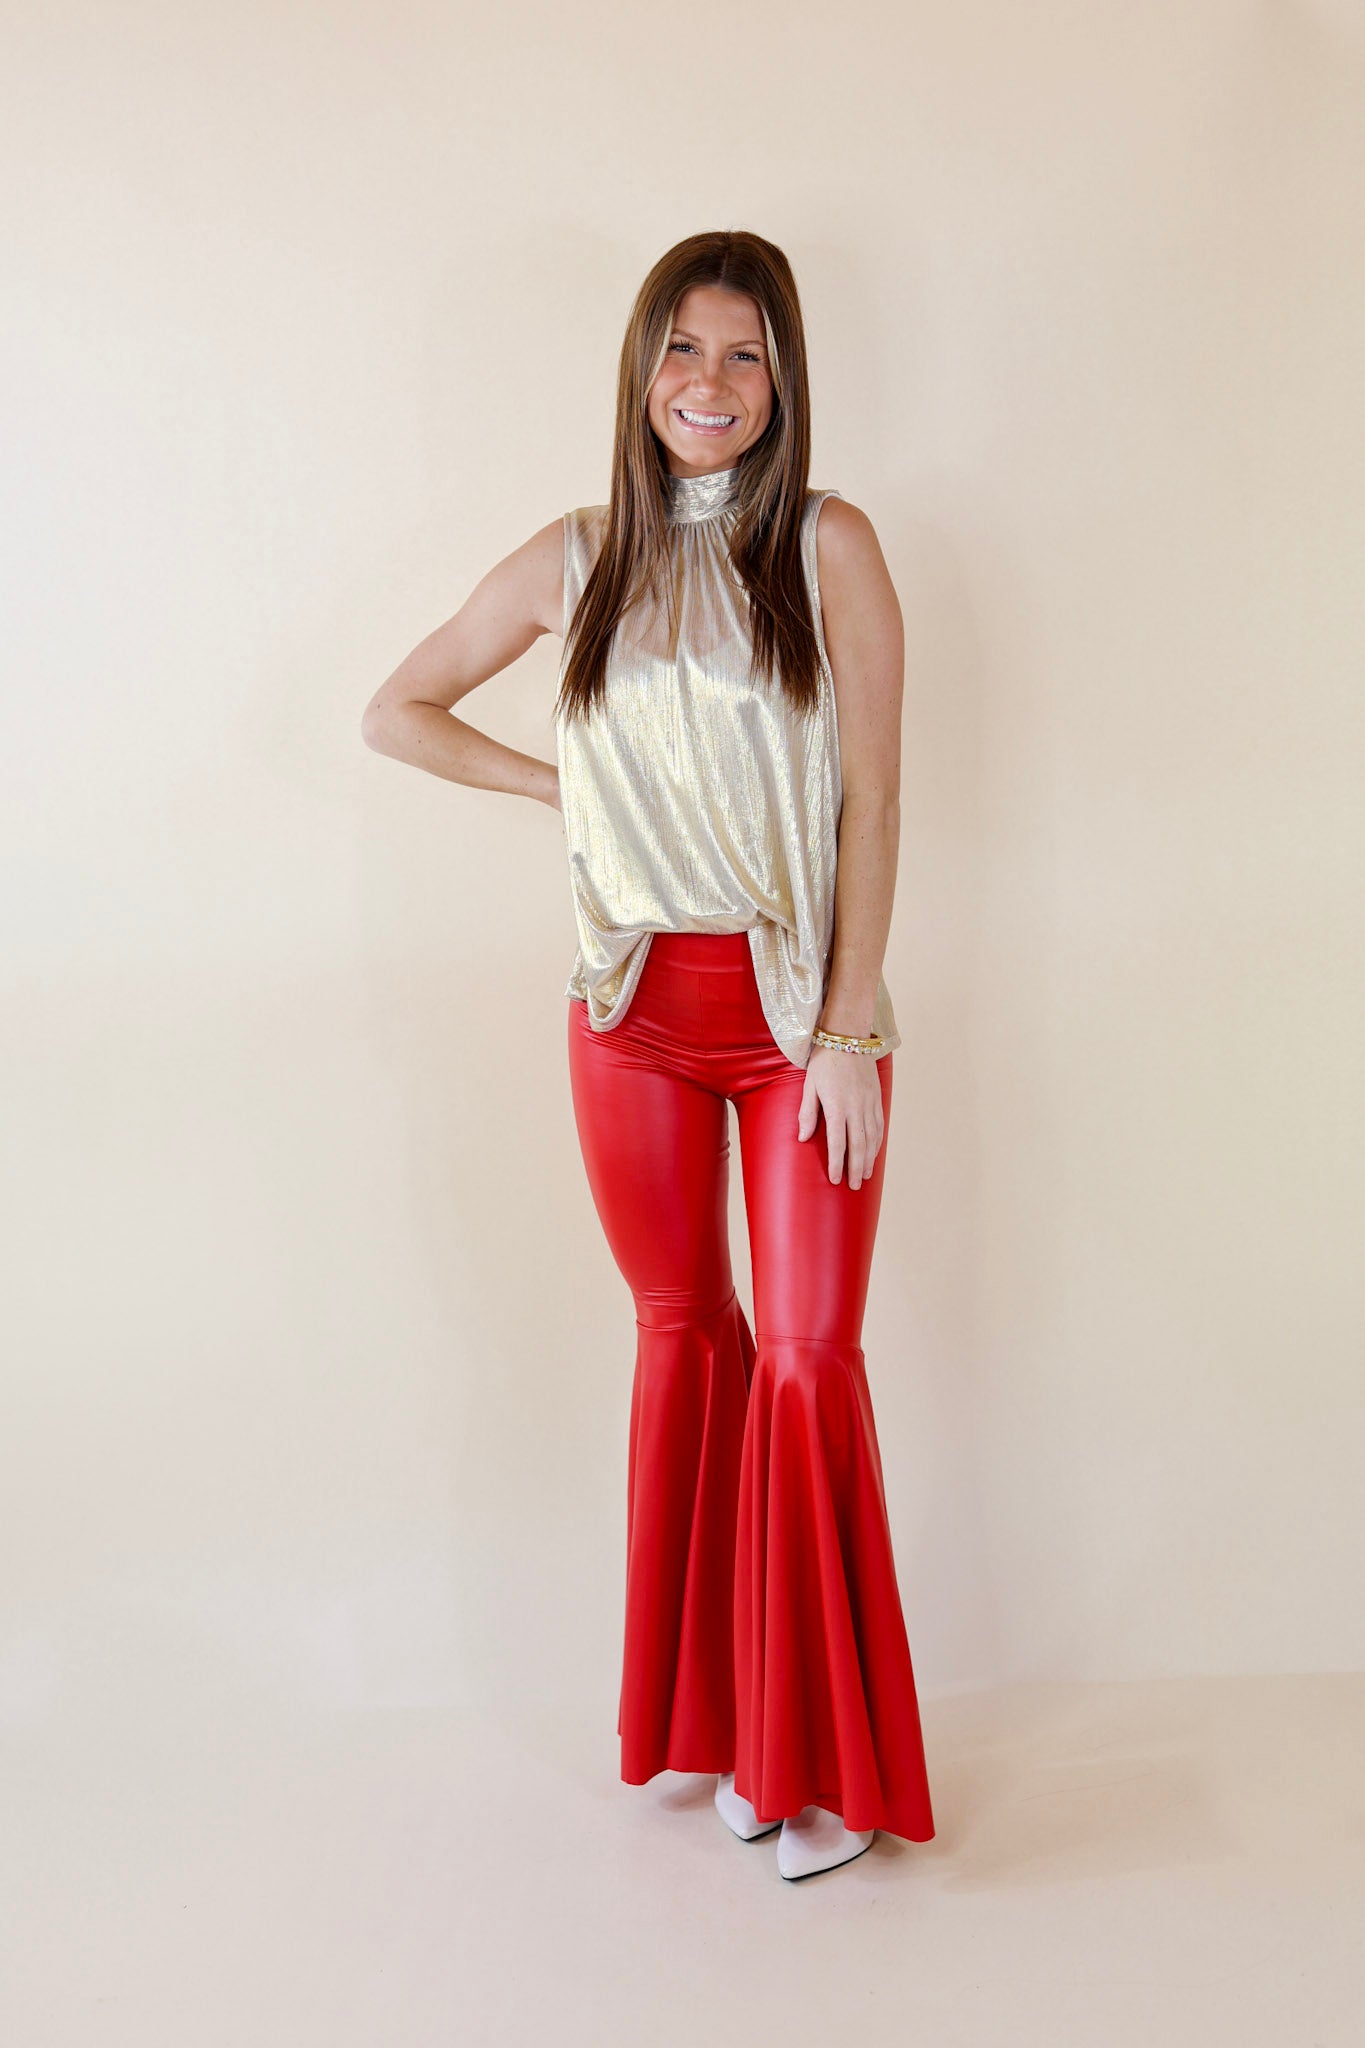 Extra Magic Mock Neck Metallic Tank Top with Tie Back in Gold - Giddy Up Glamour Boutique